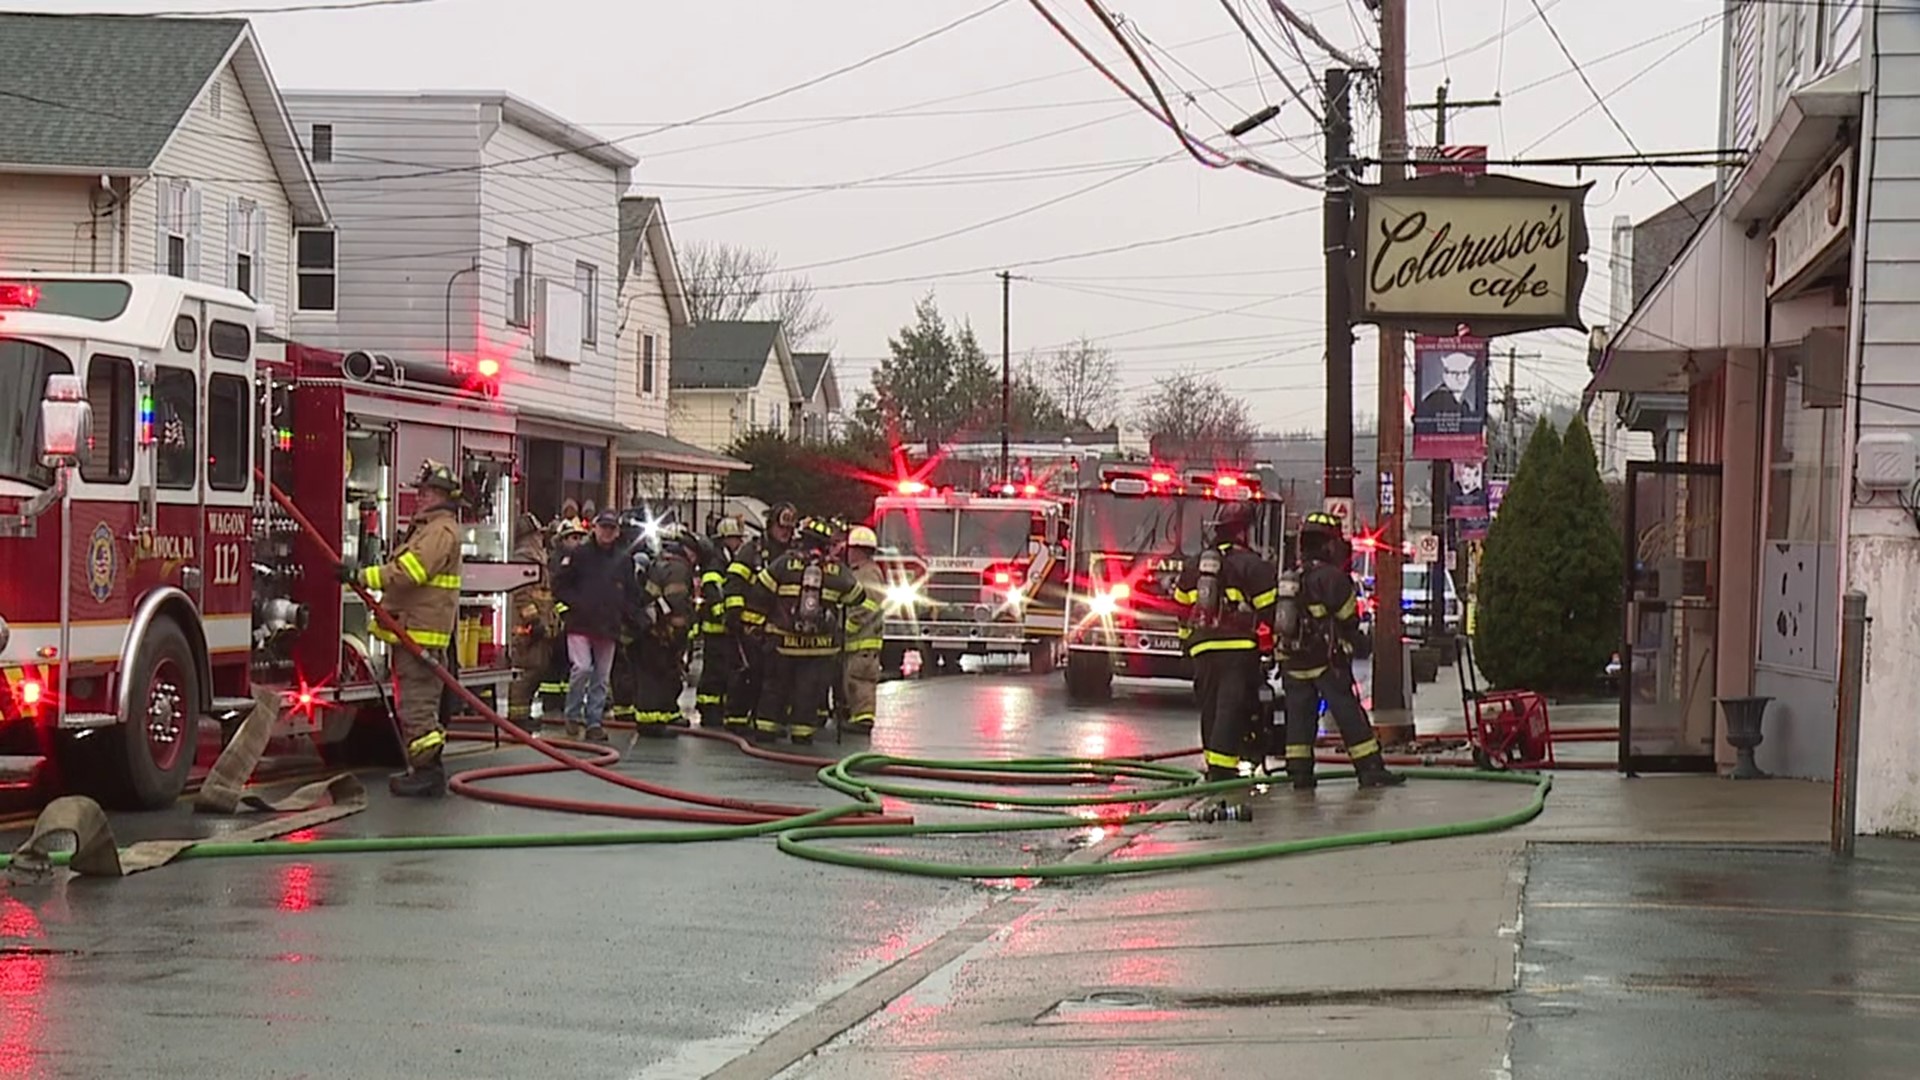 Fire crews responded to Colarusso's Cafe along Main Street in Avoca around 7:30 a.m. Saturday.